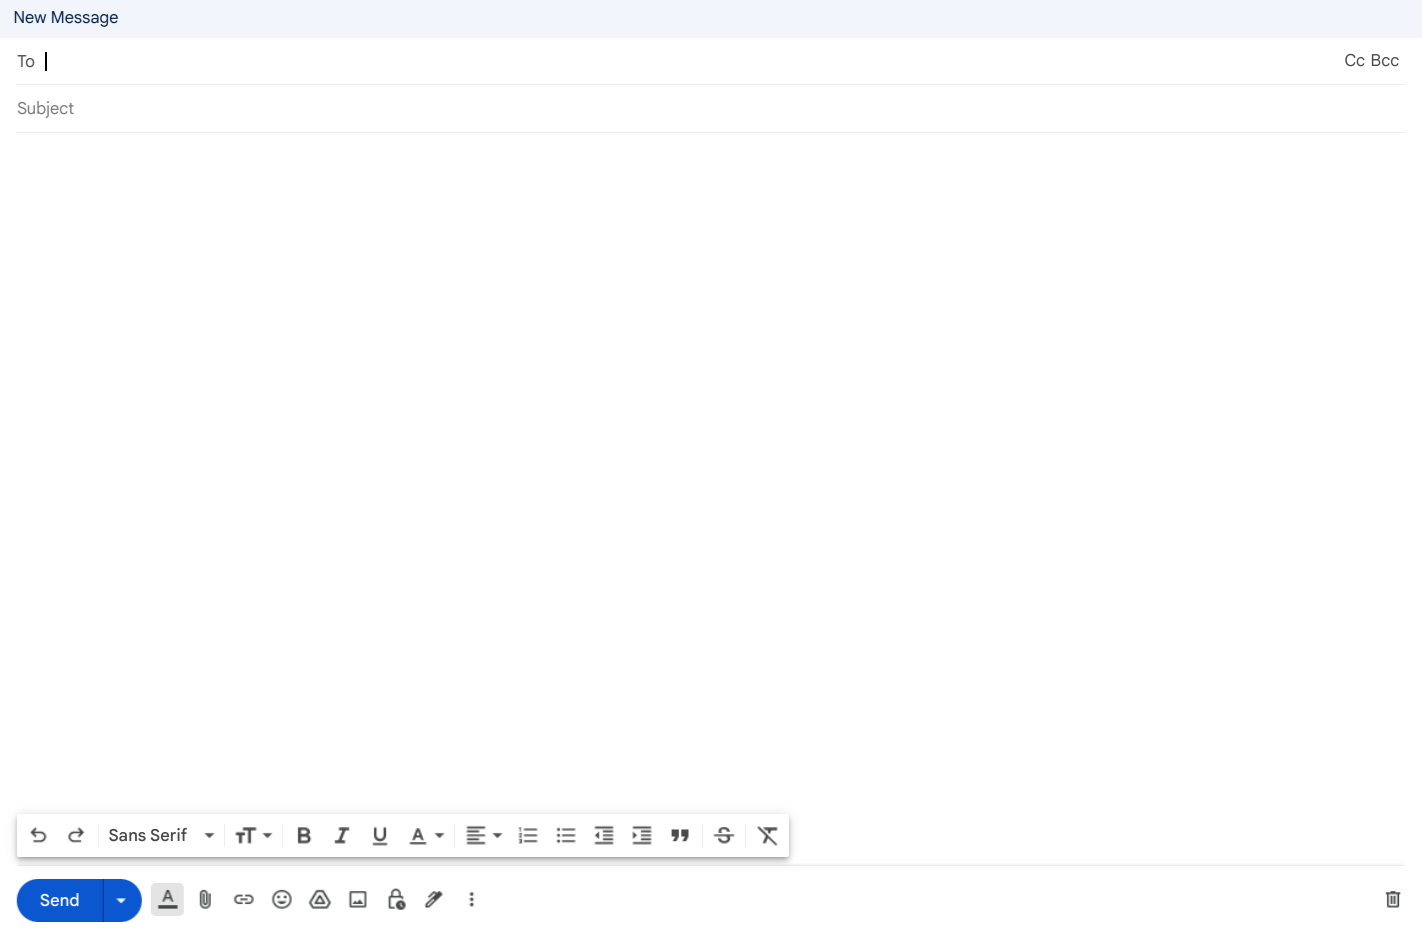 Composing a new mail through the "mailto" shortcut